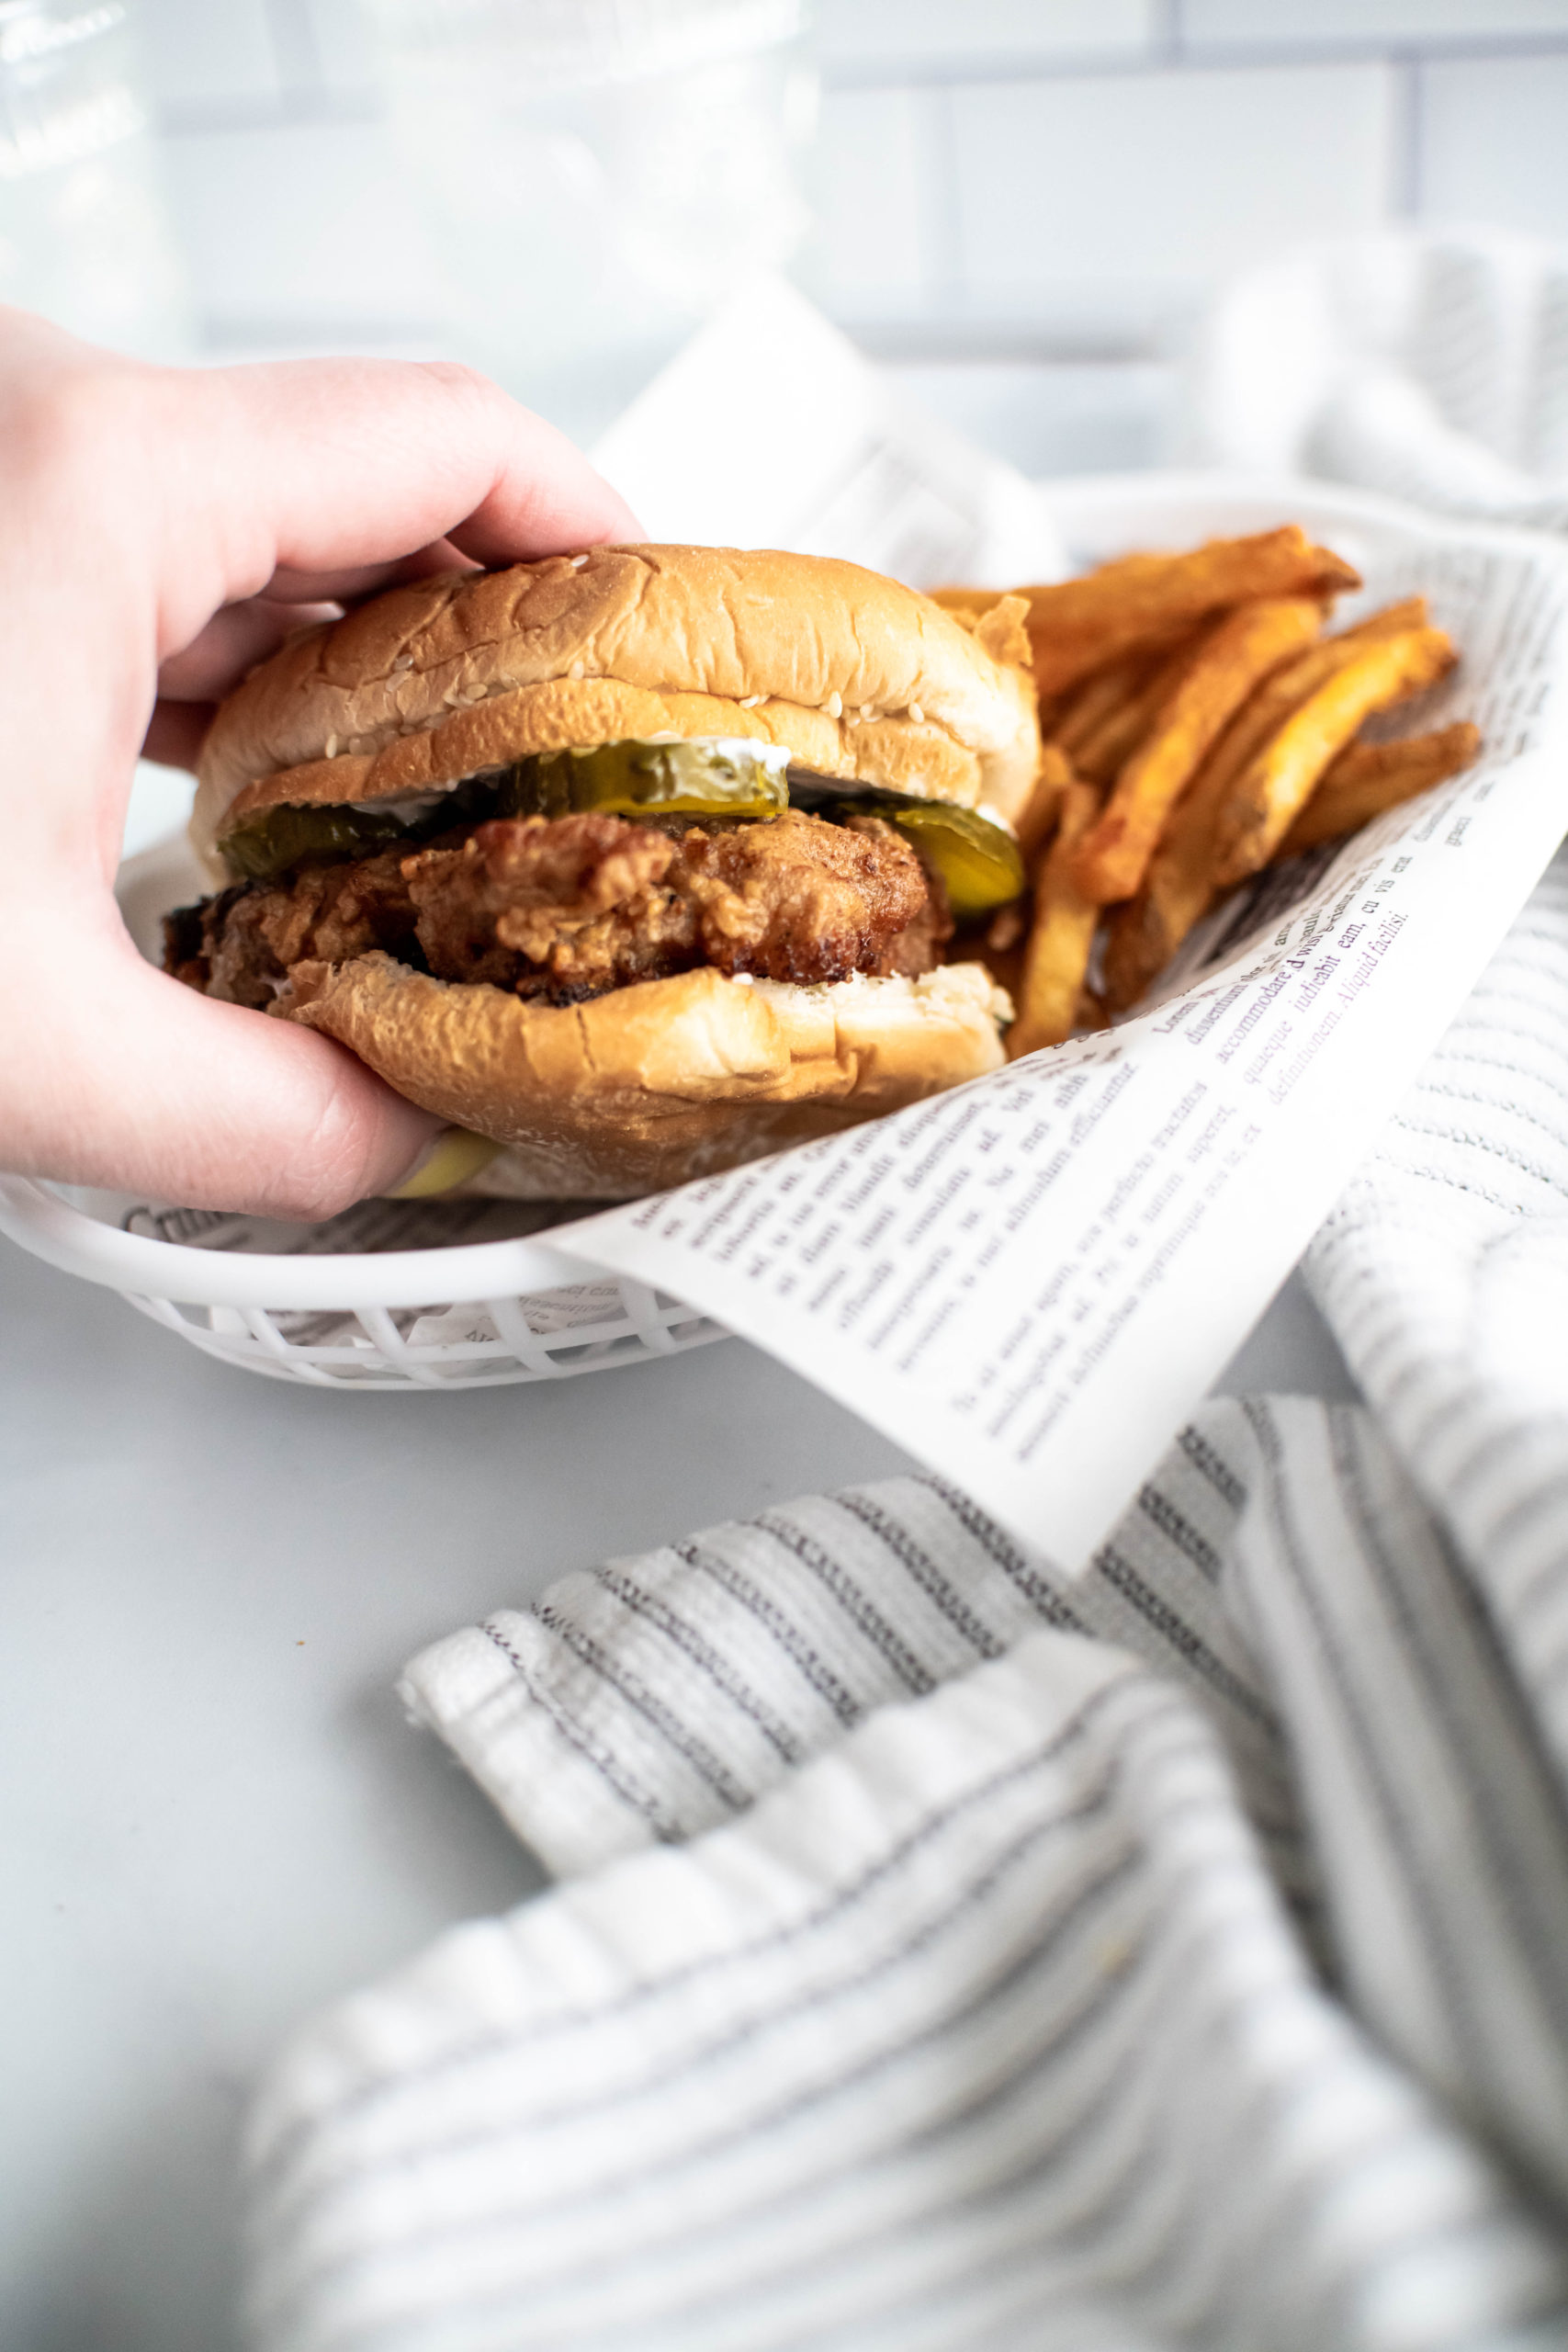 Hand reaching into a white plastic food basket to grab a fried chicken sandwich.